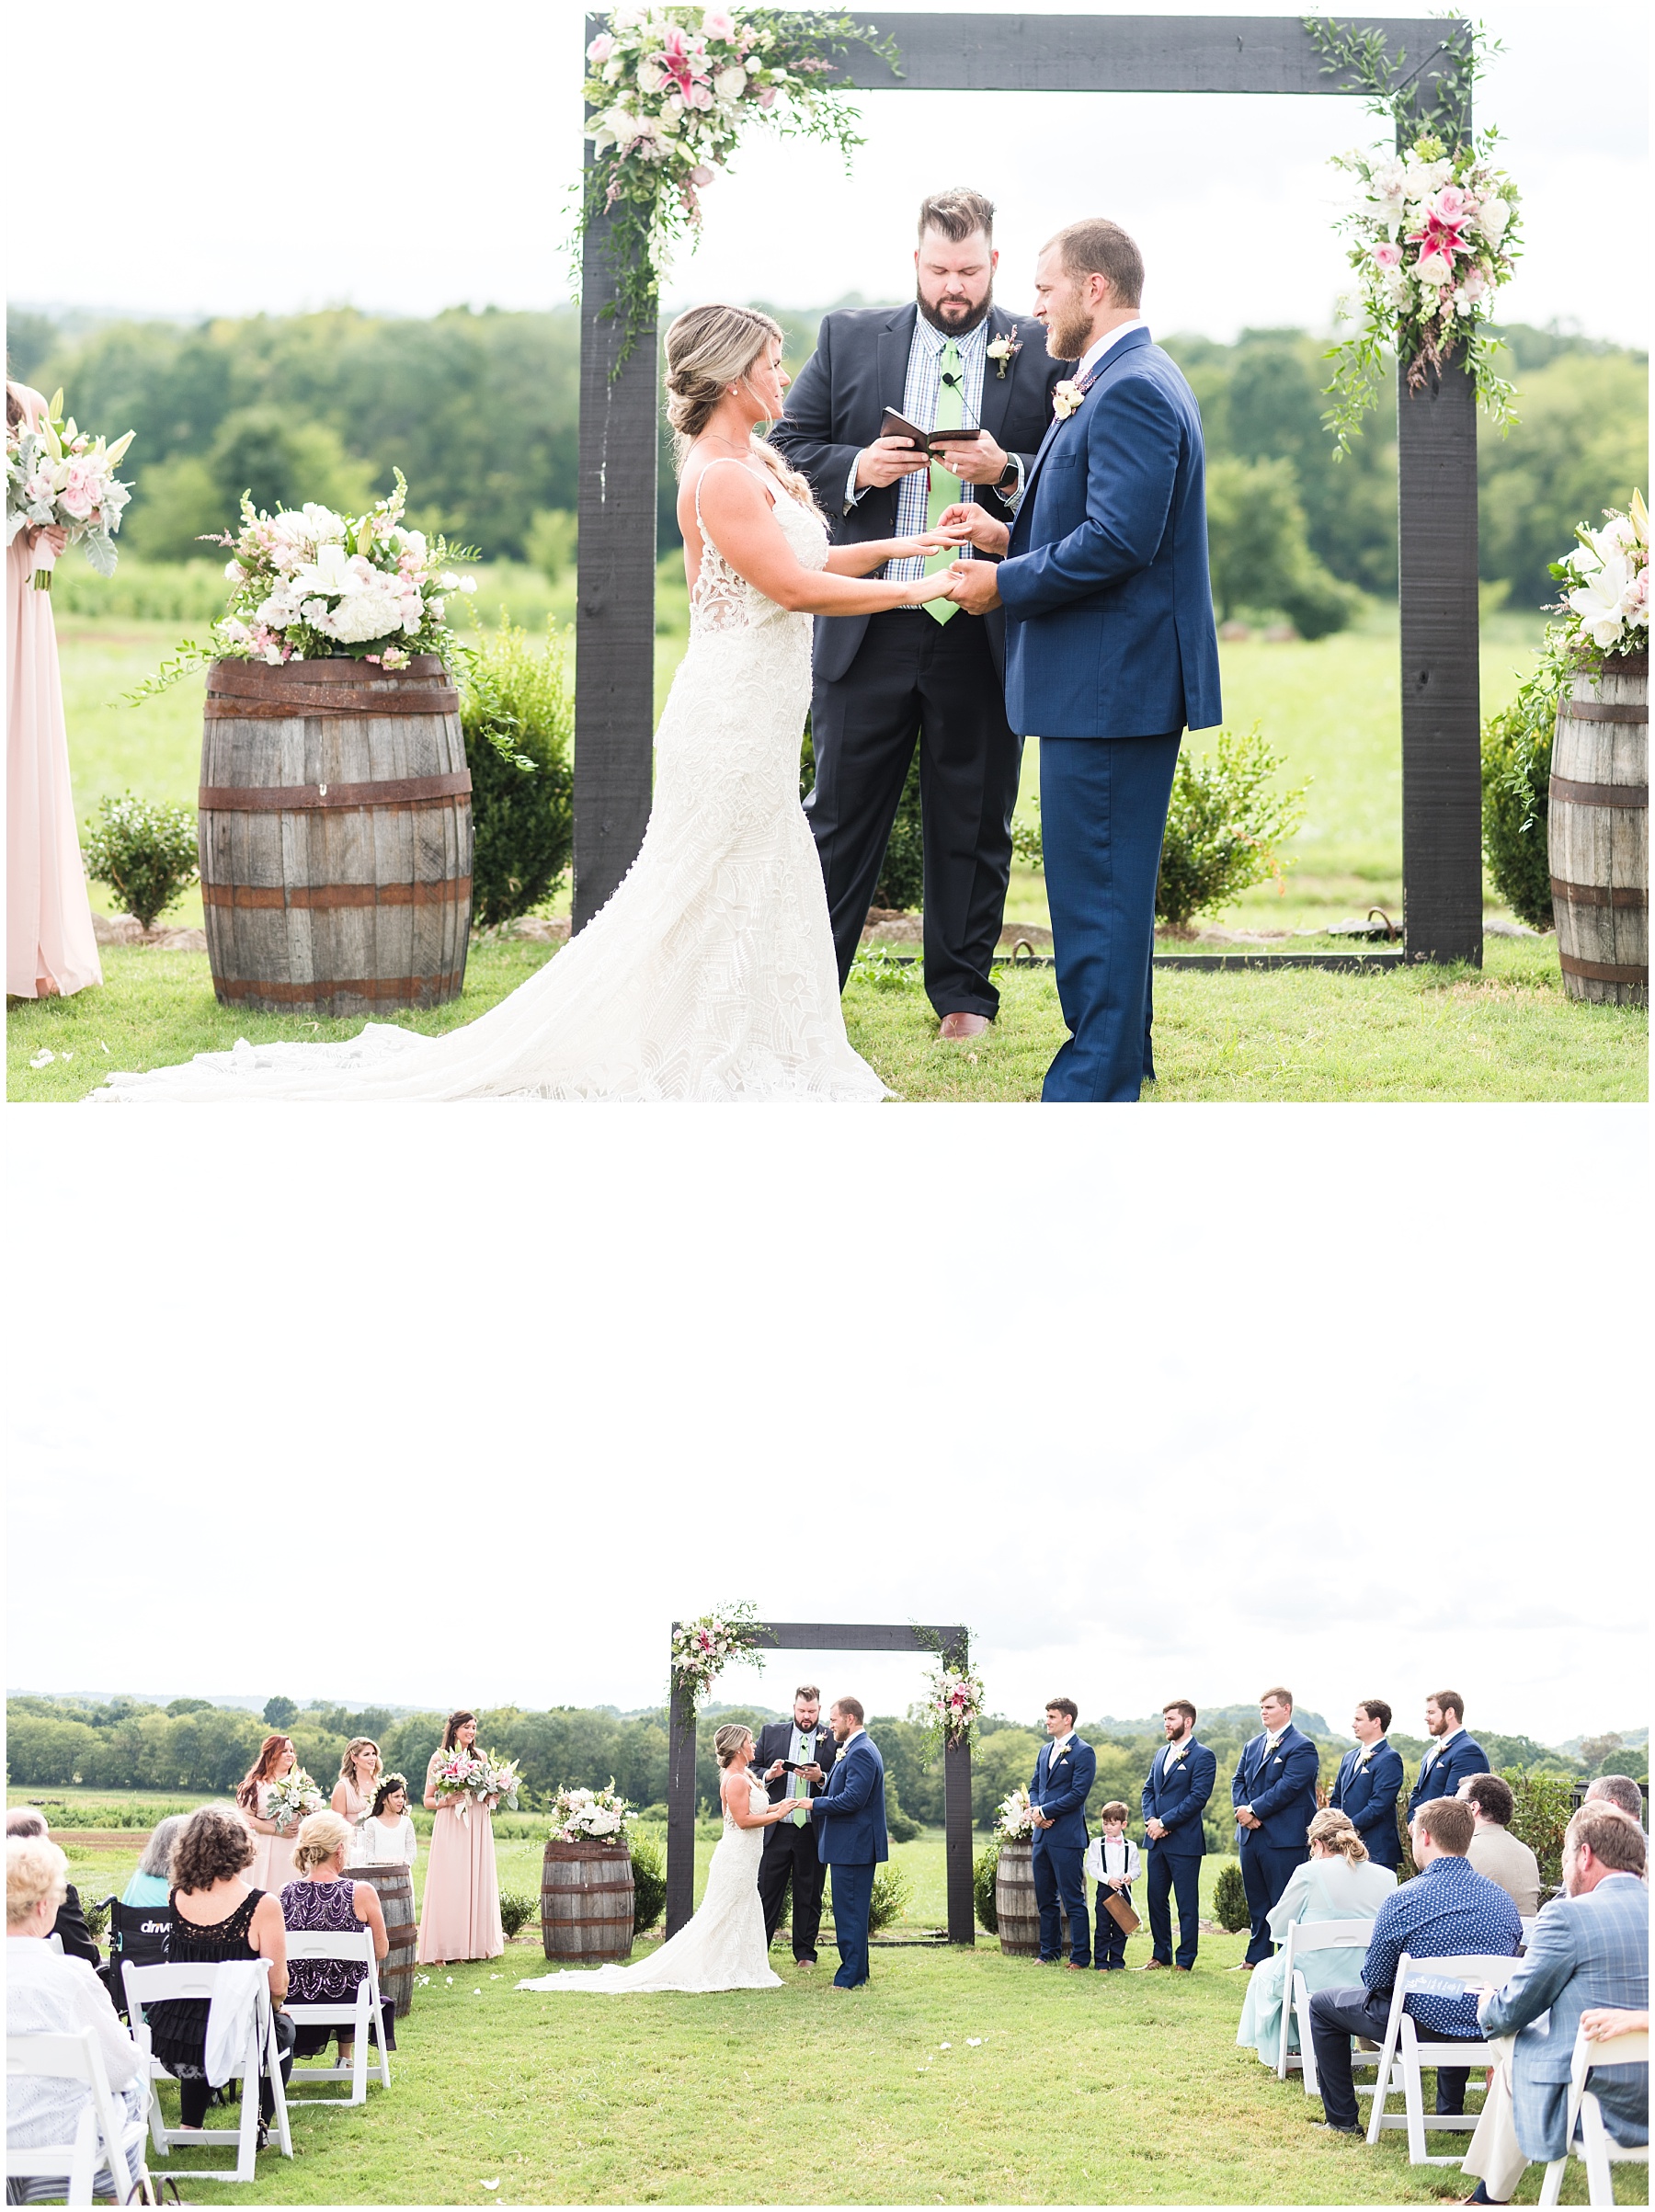 Blush and Navy wedding caremony at Allenbrooke Farms in Spring Hill